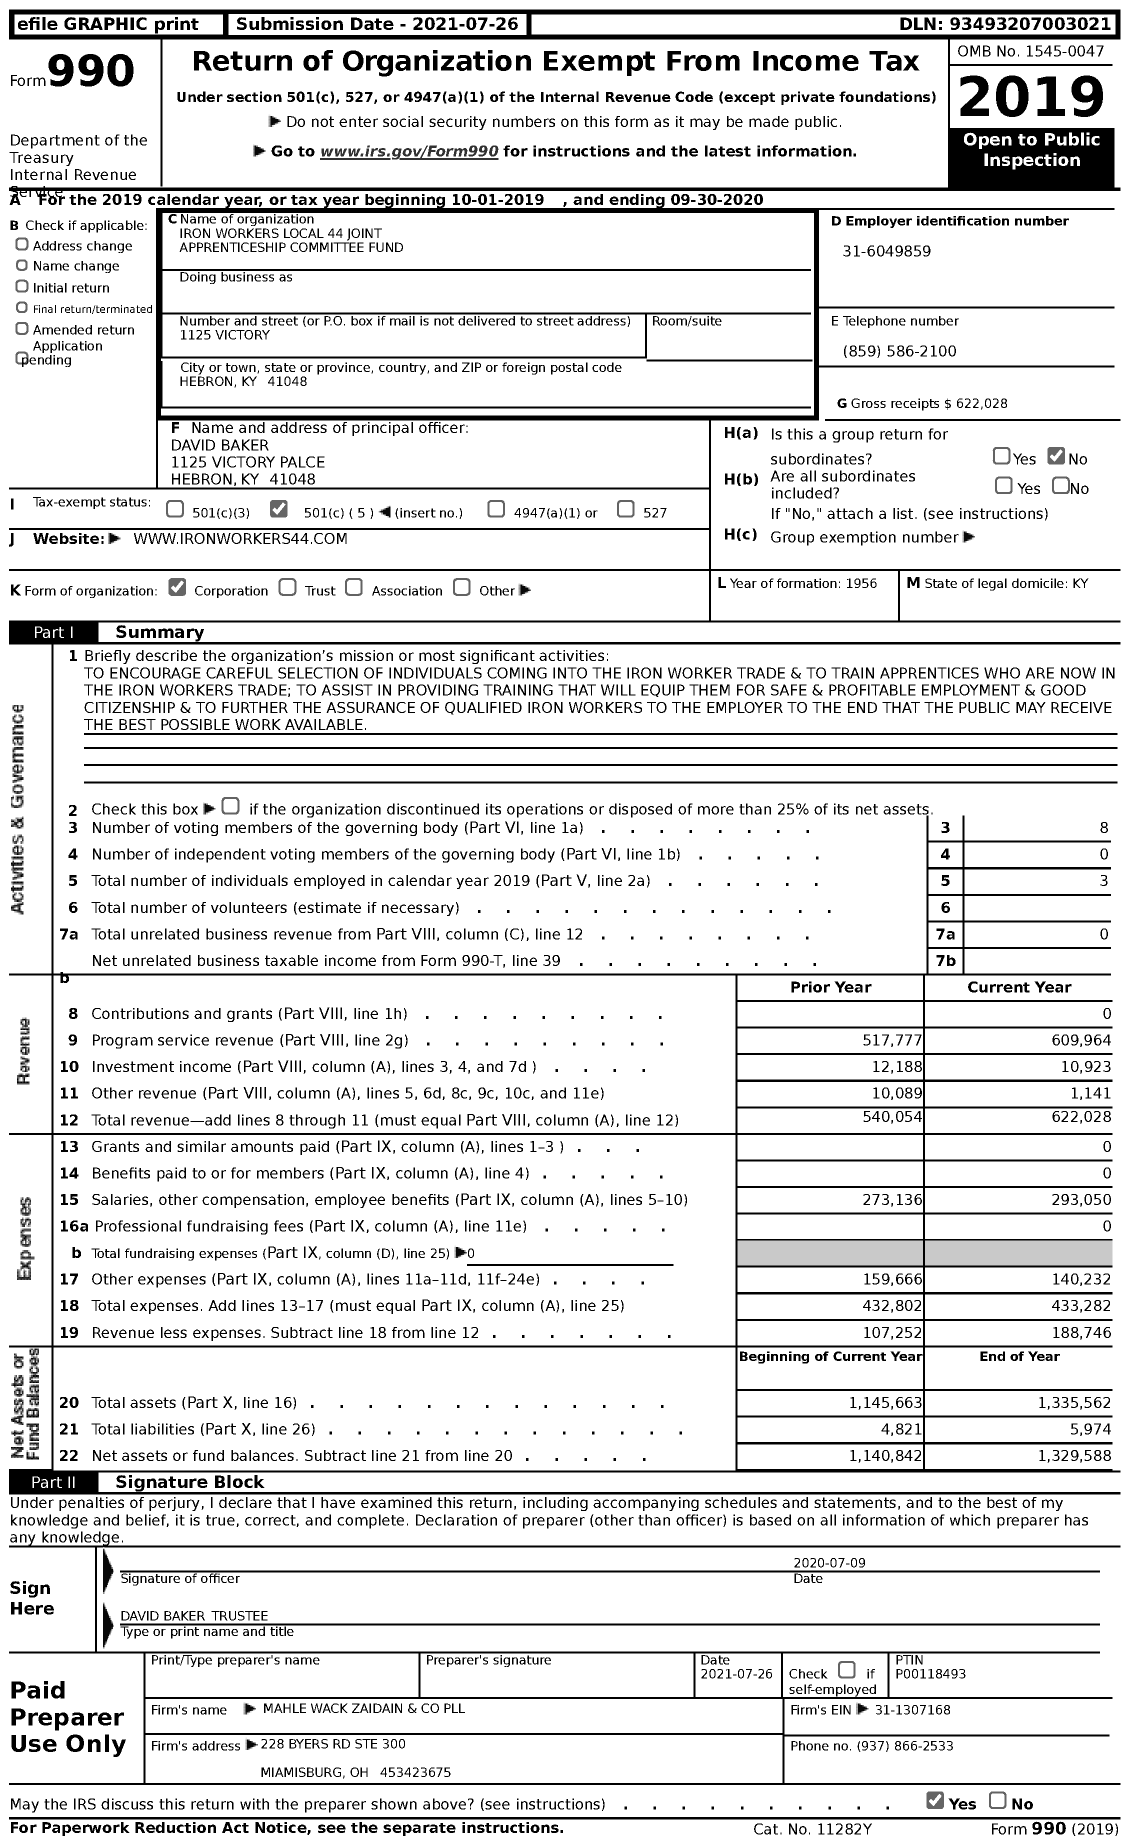 Image of first page of 2019 Form 990 for Iron Workers Local 44 Joint Apprenticeship Committee Fund